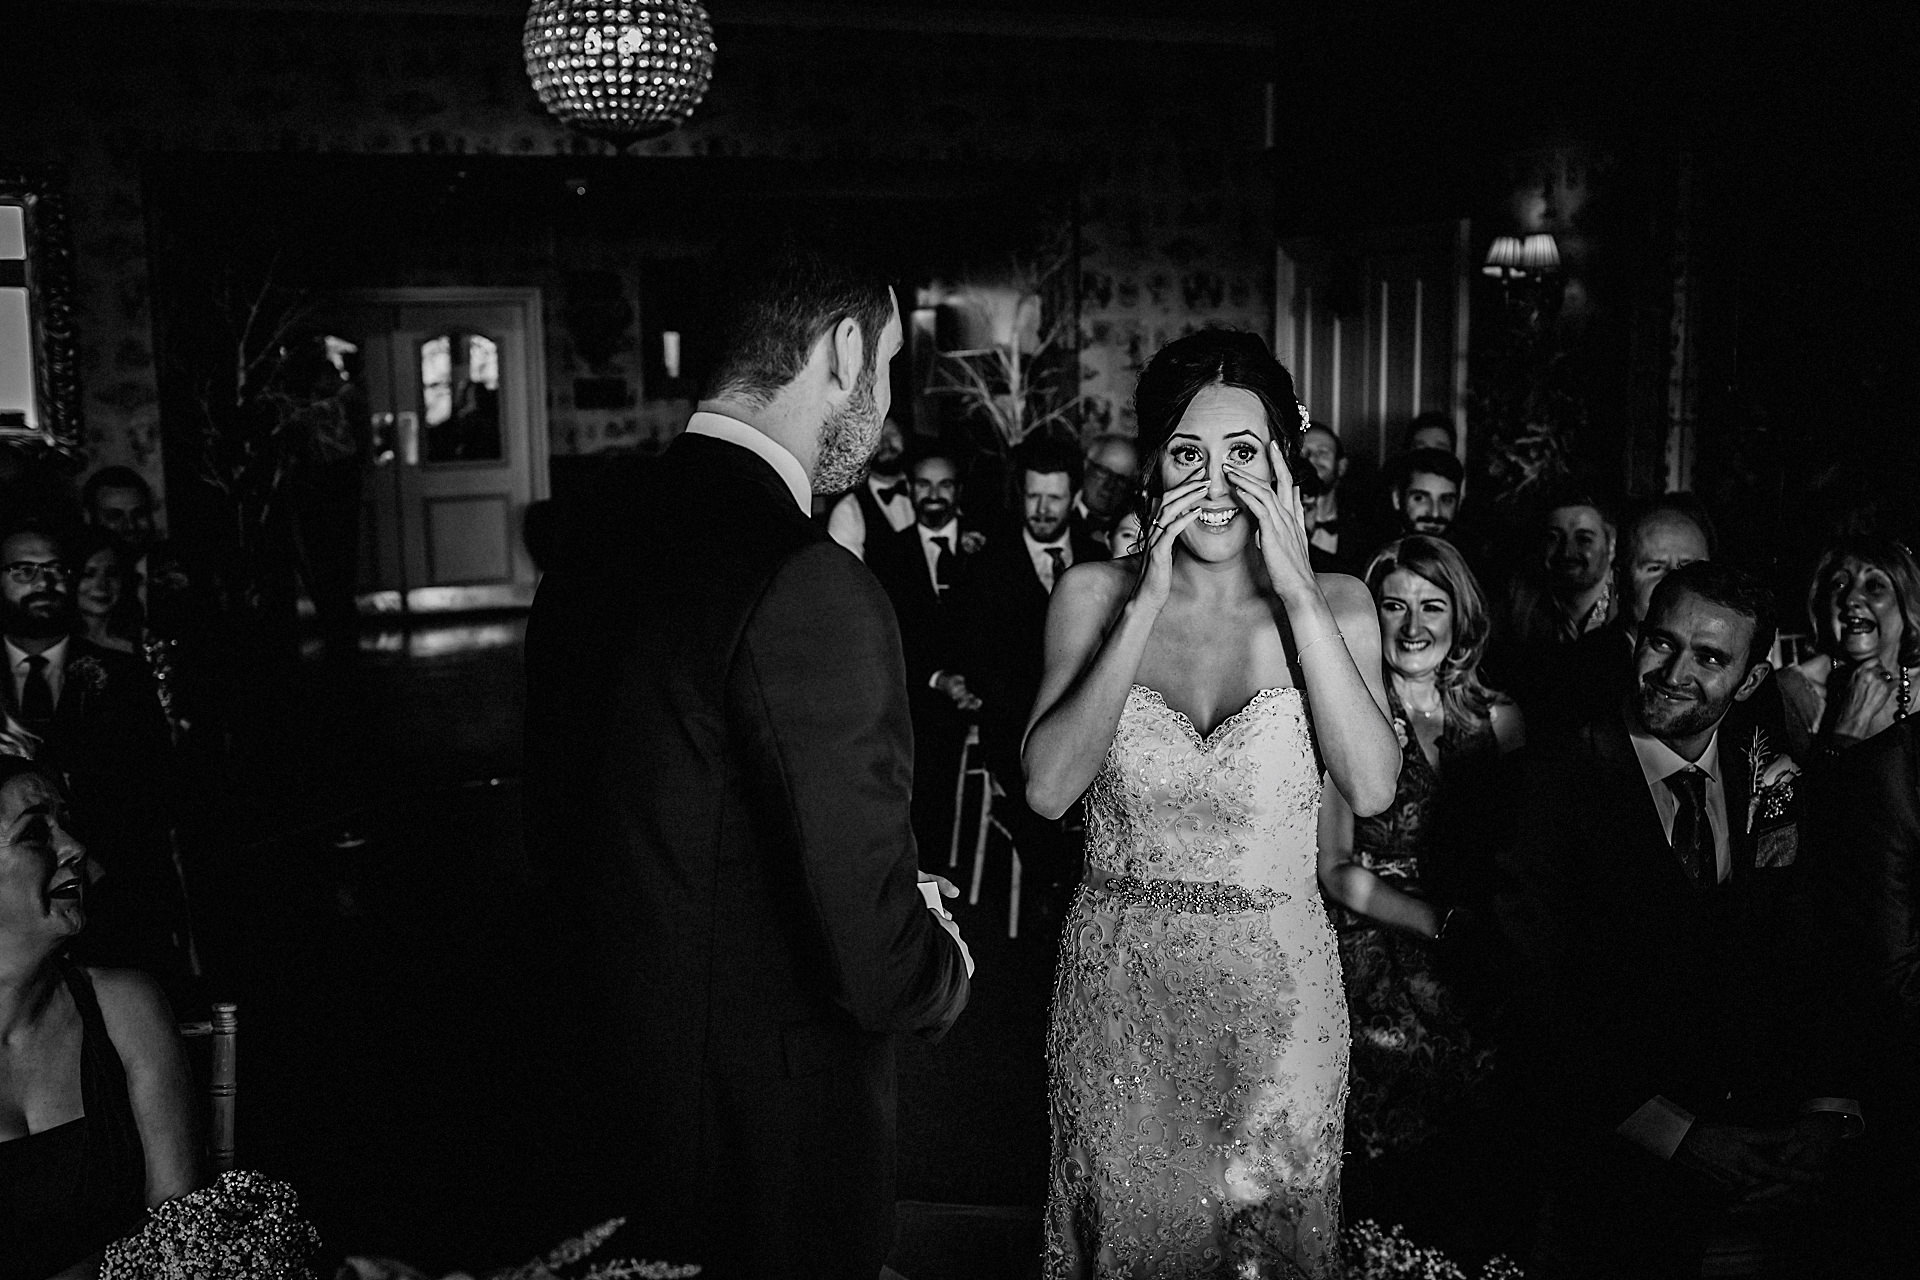 crying at the wedding, tears photo